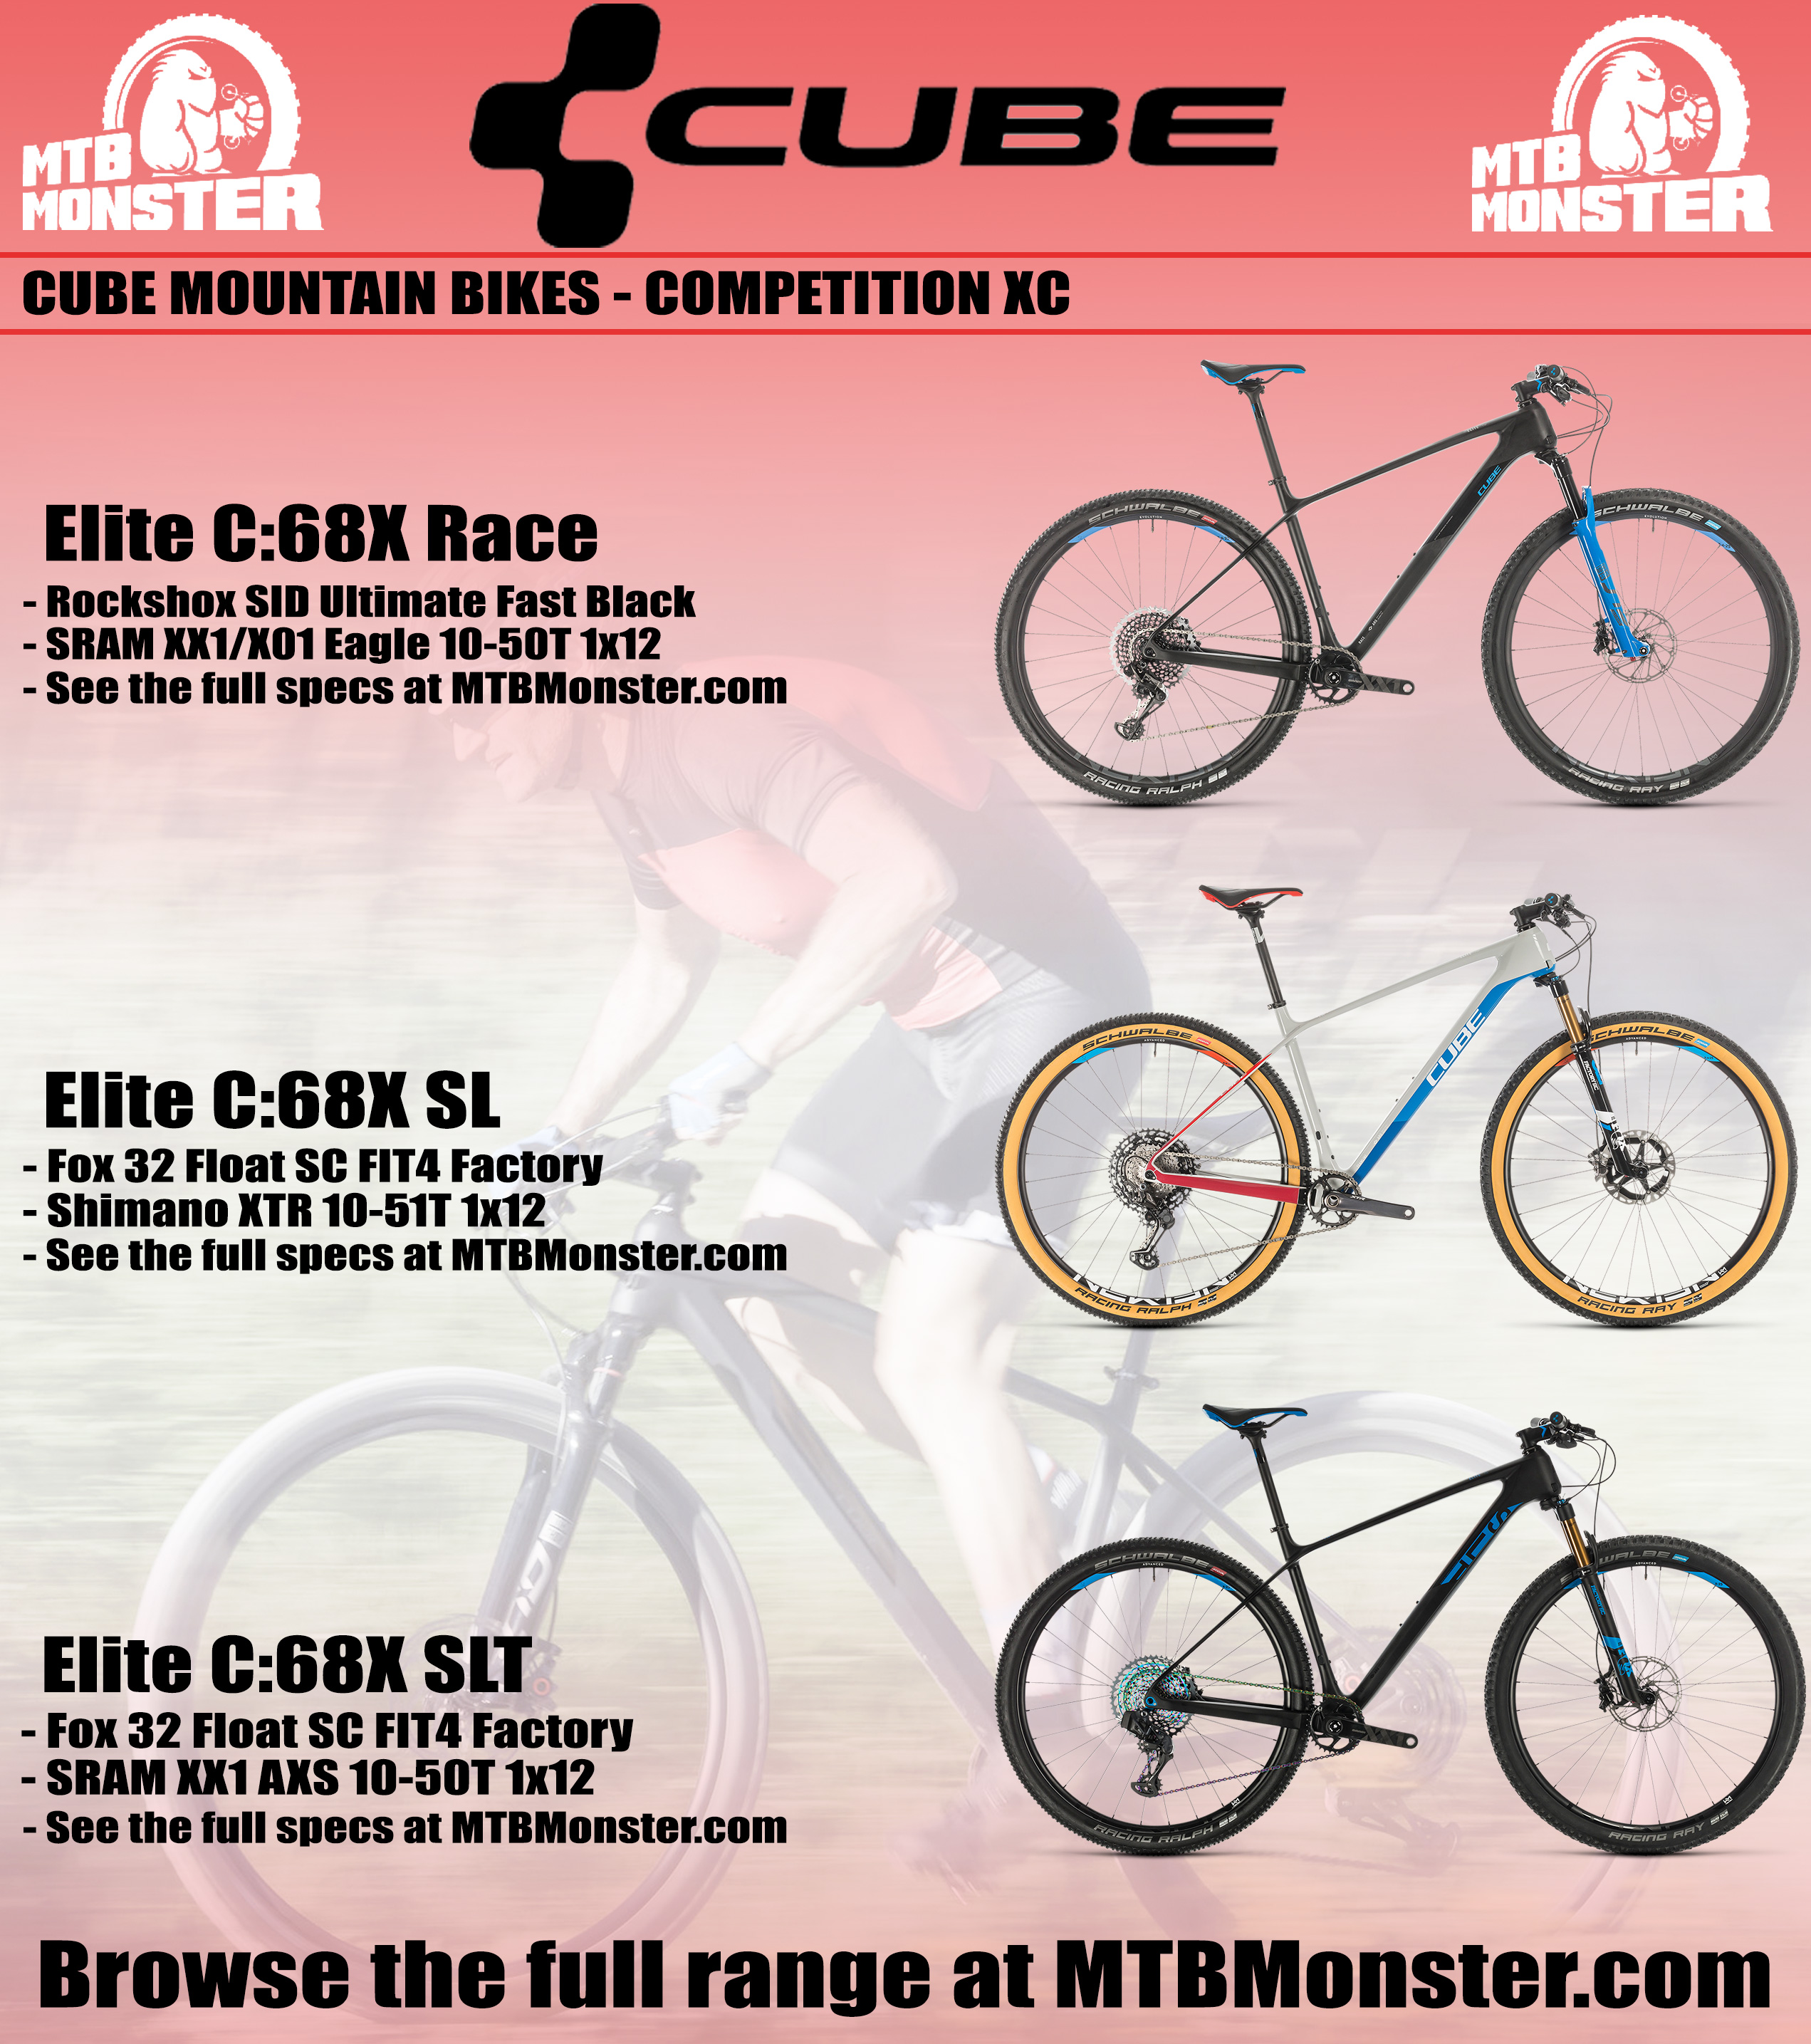 Cube 2020 Cross Country Mountain Bikes Range Guide Information and Differences